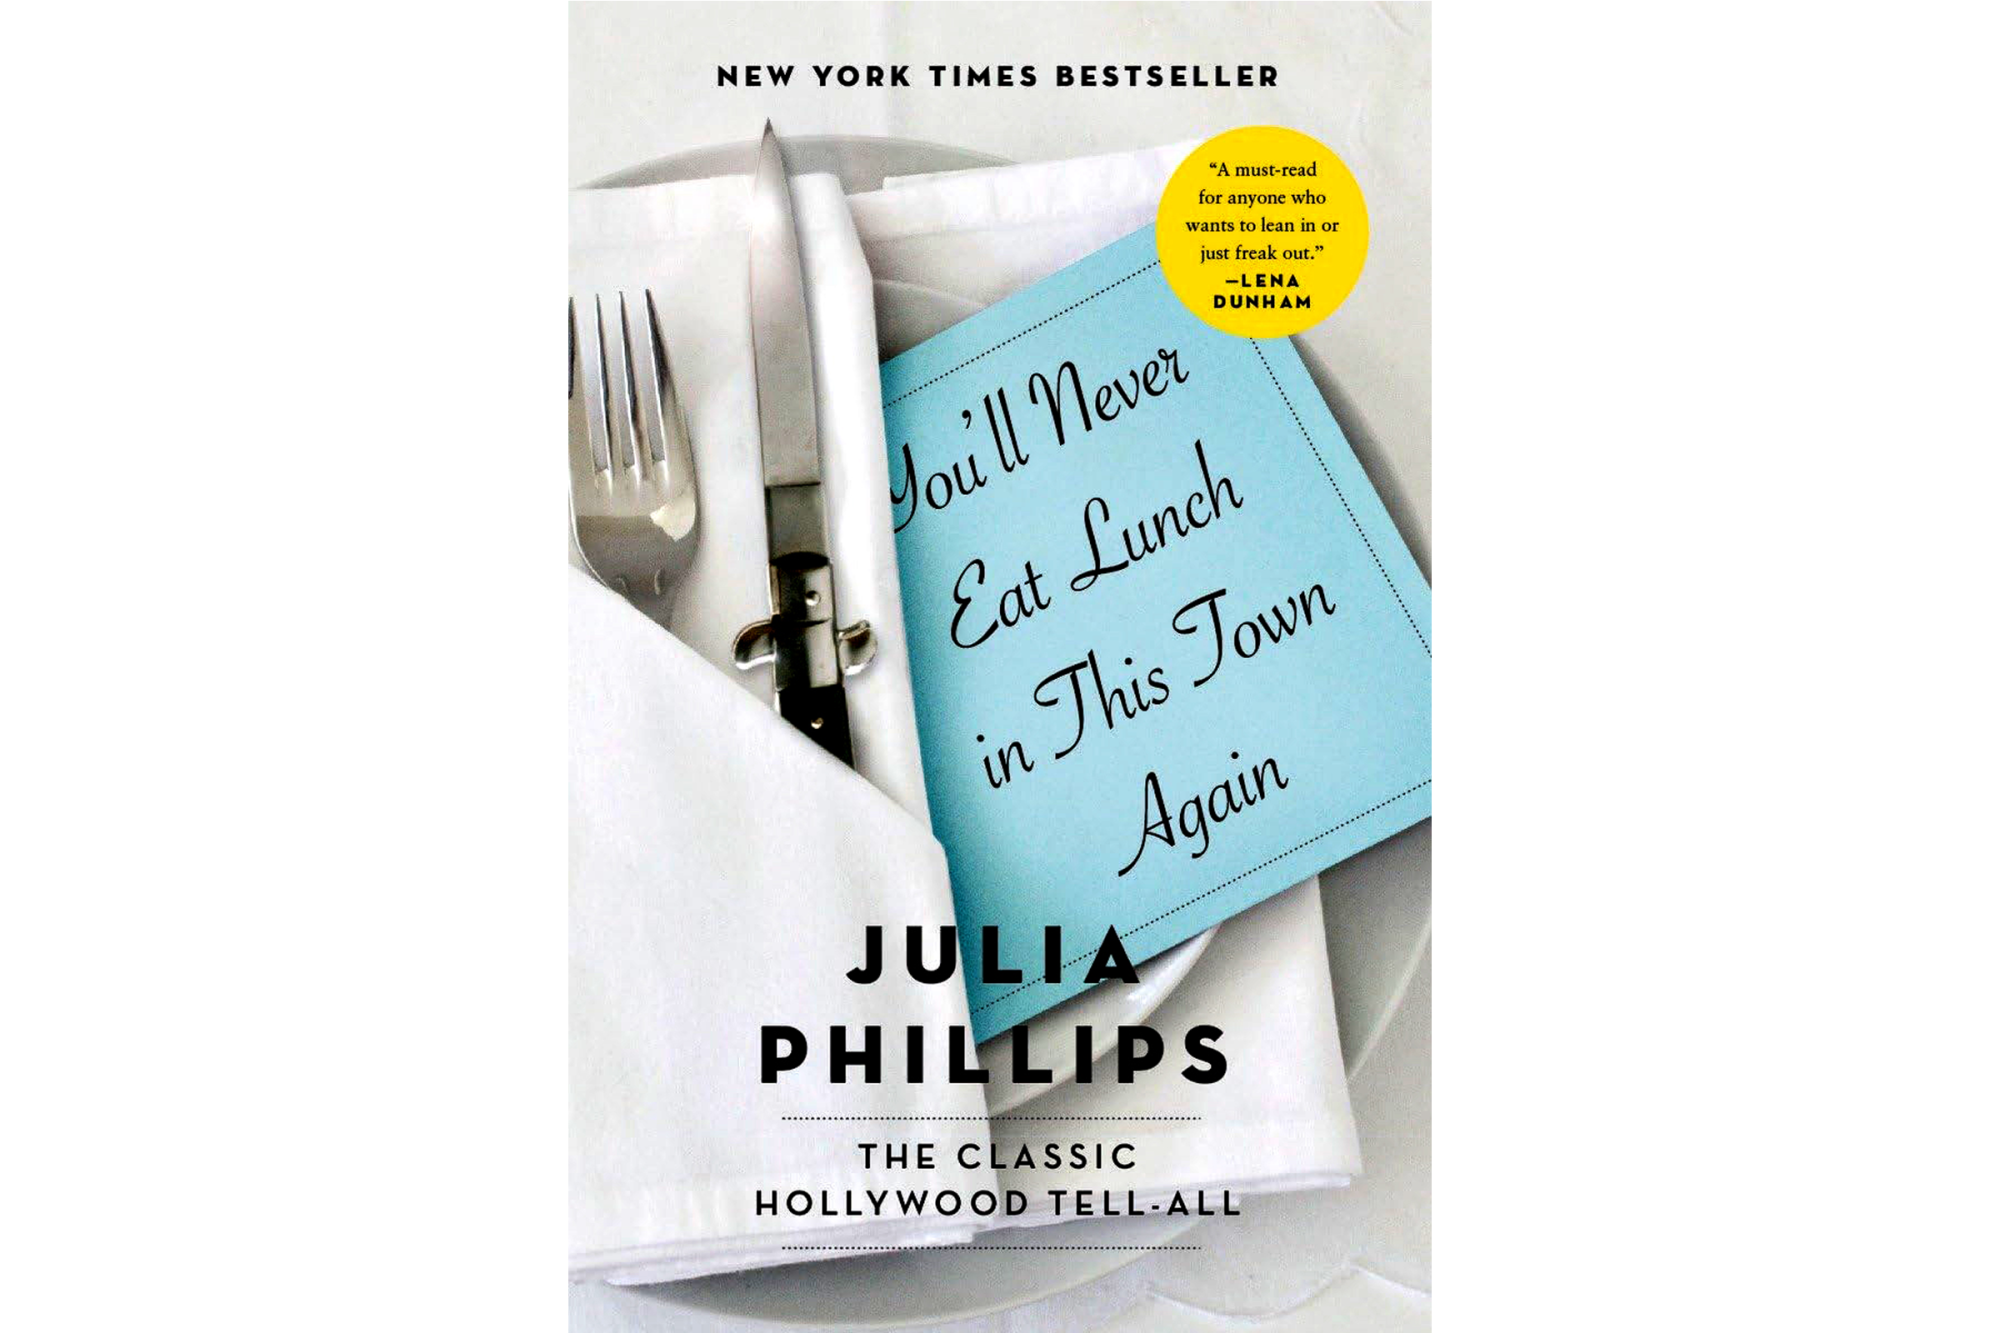 "You'll Never Eat Lunch in This Town Again" by Julia Phillips